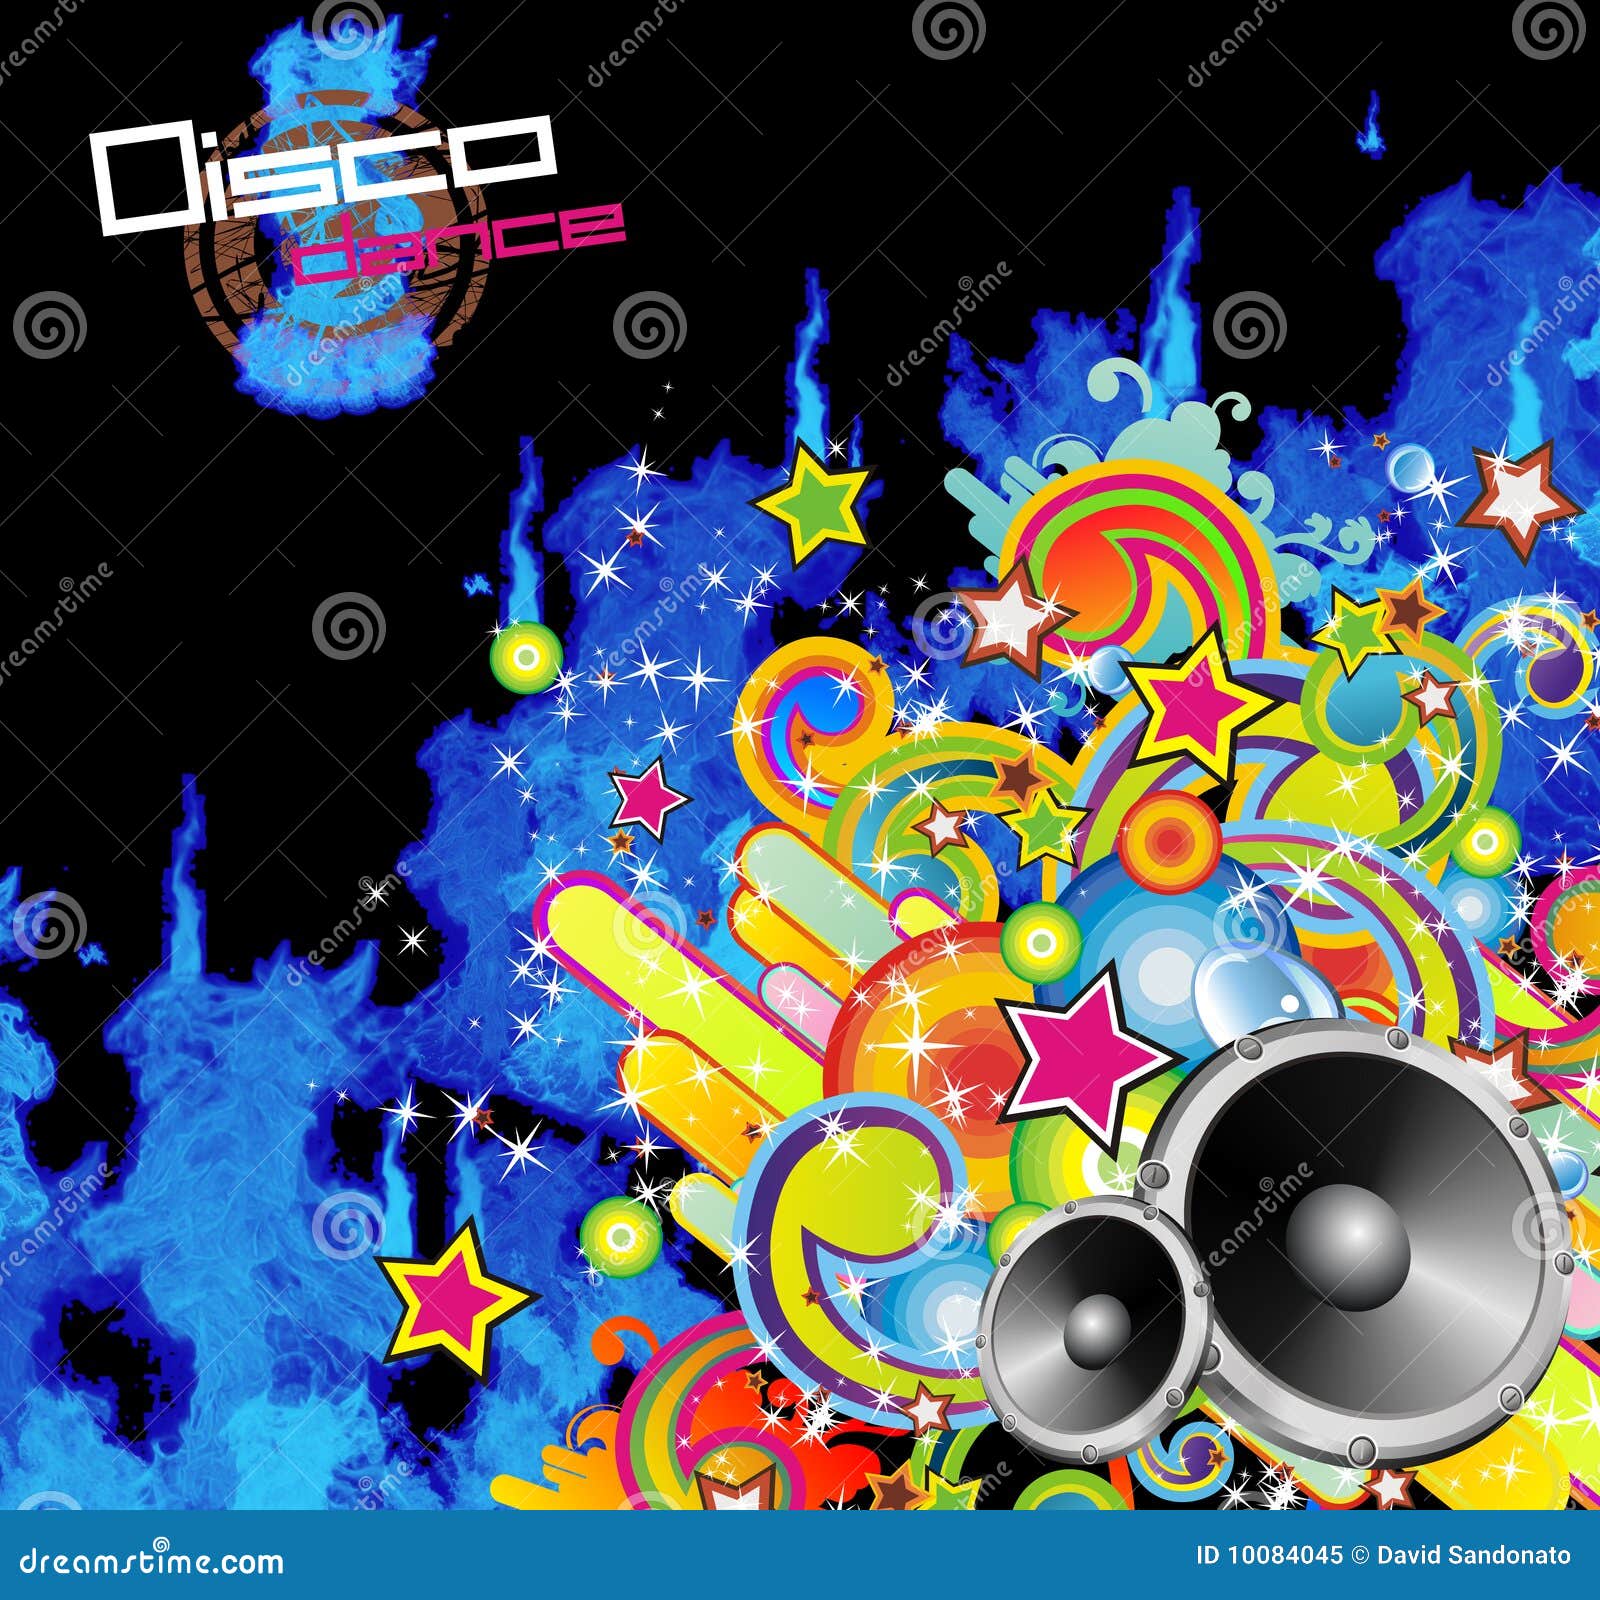 Abstract Music Flyer Background Royalty Free Stock Photo - Image: 10084045